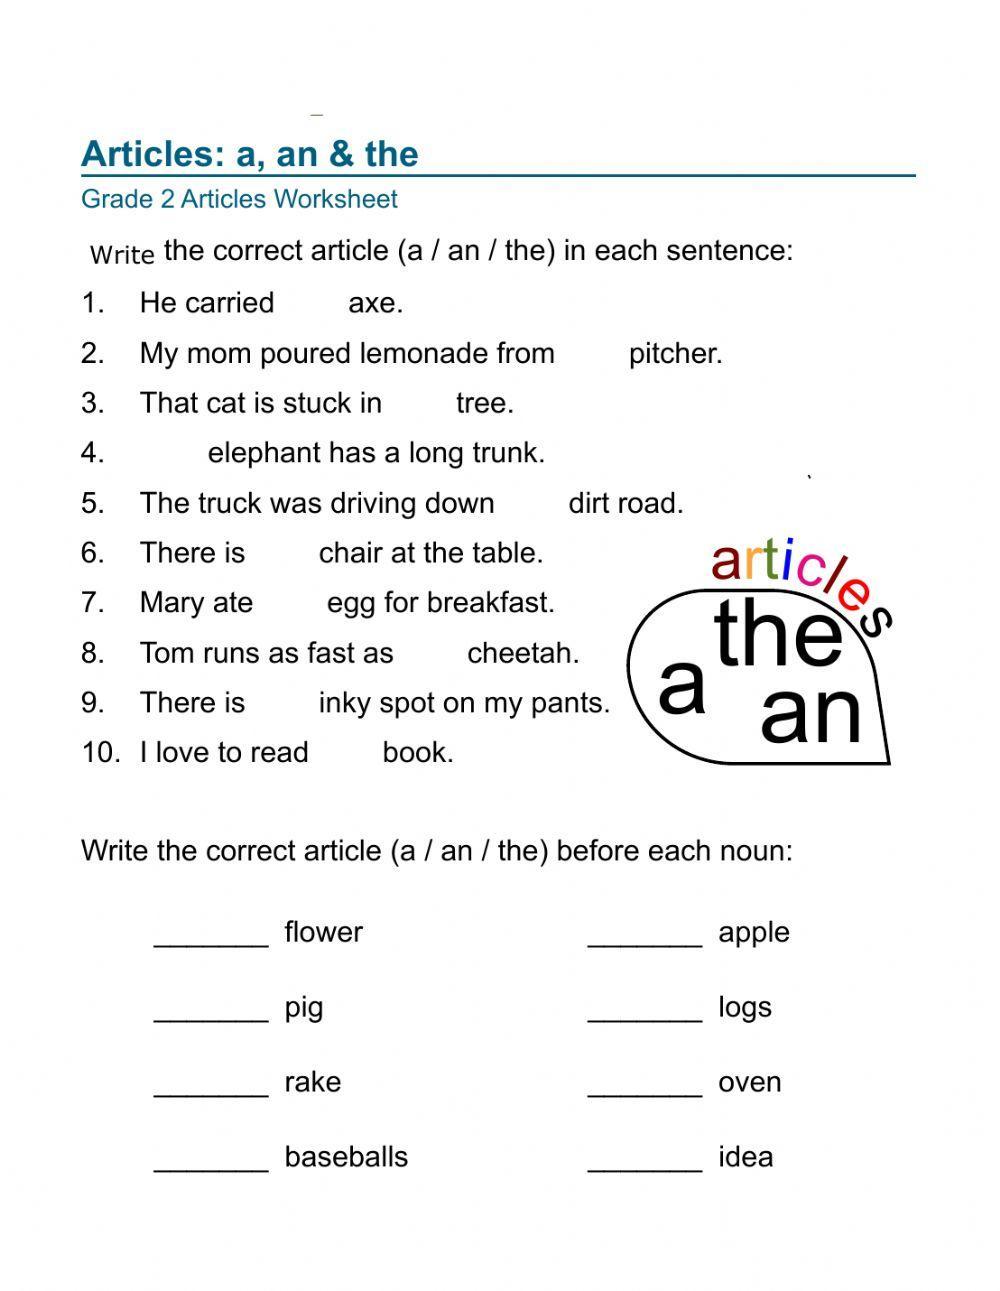 Articles - A, an, the